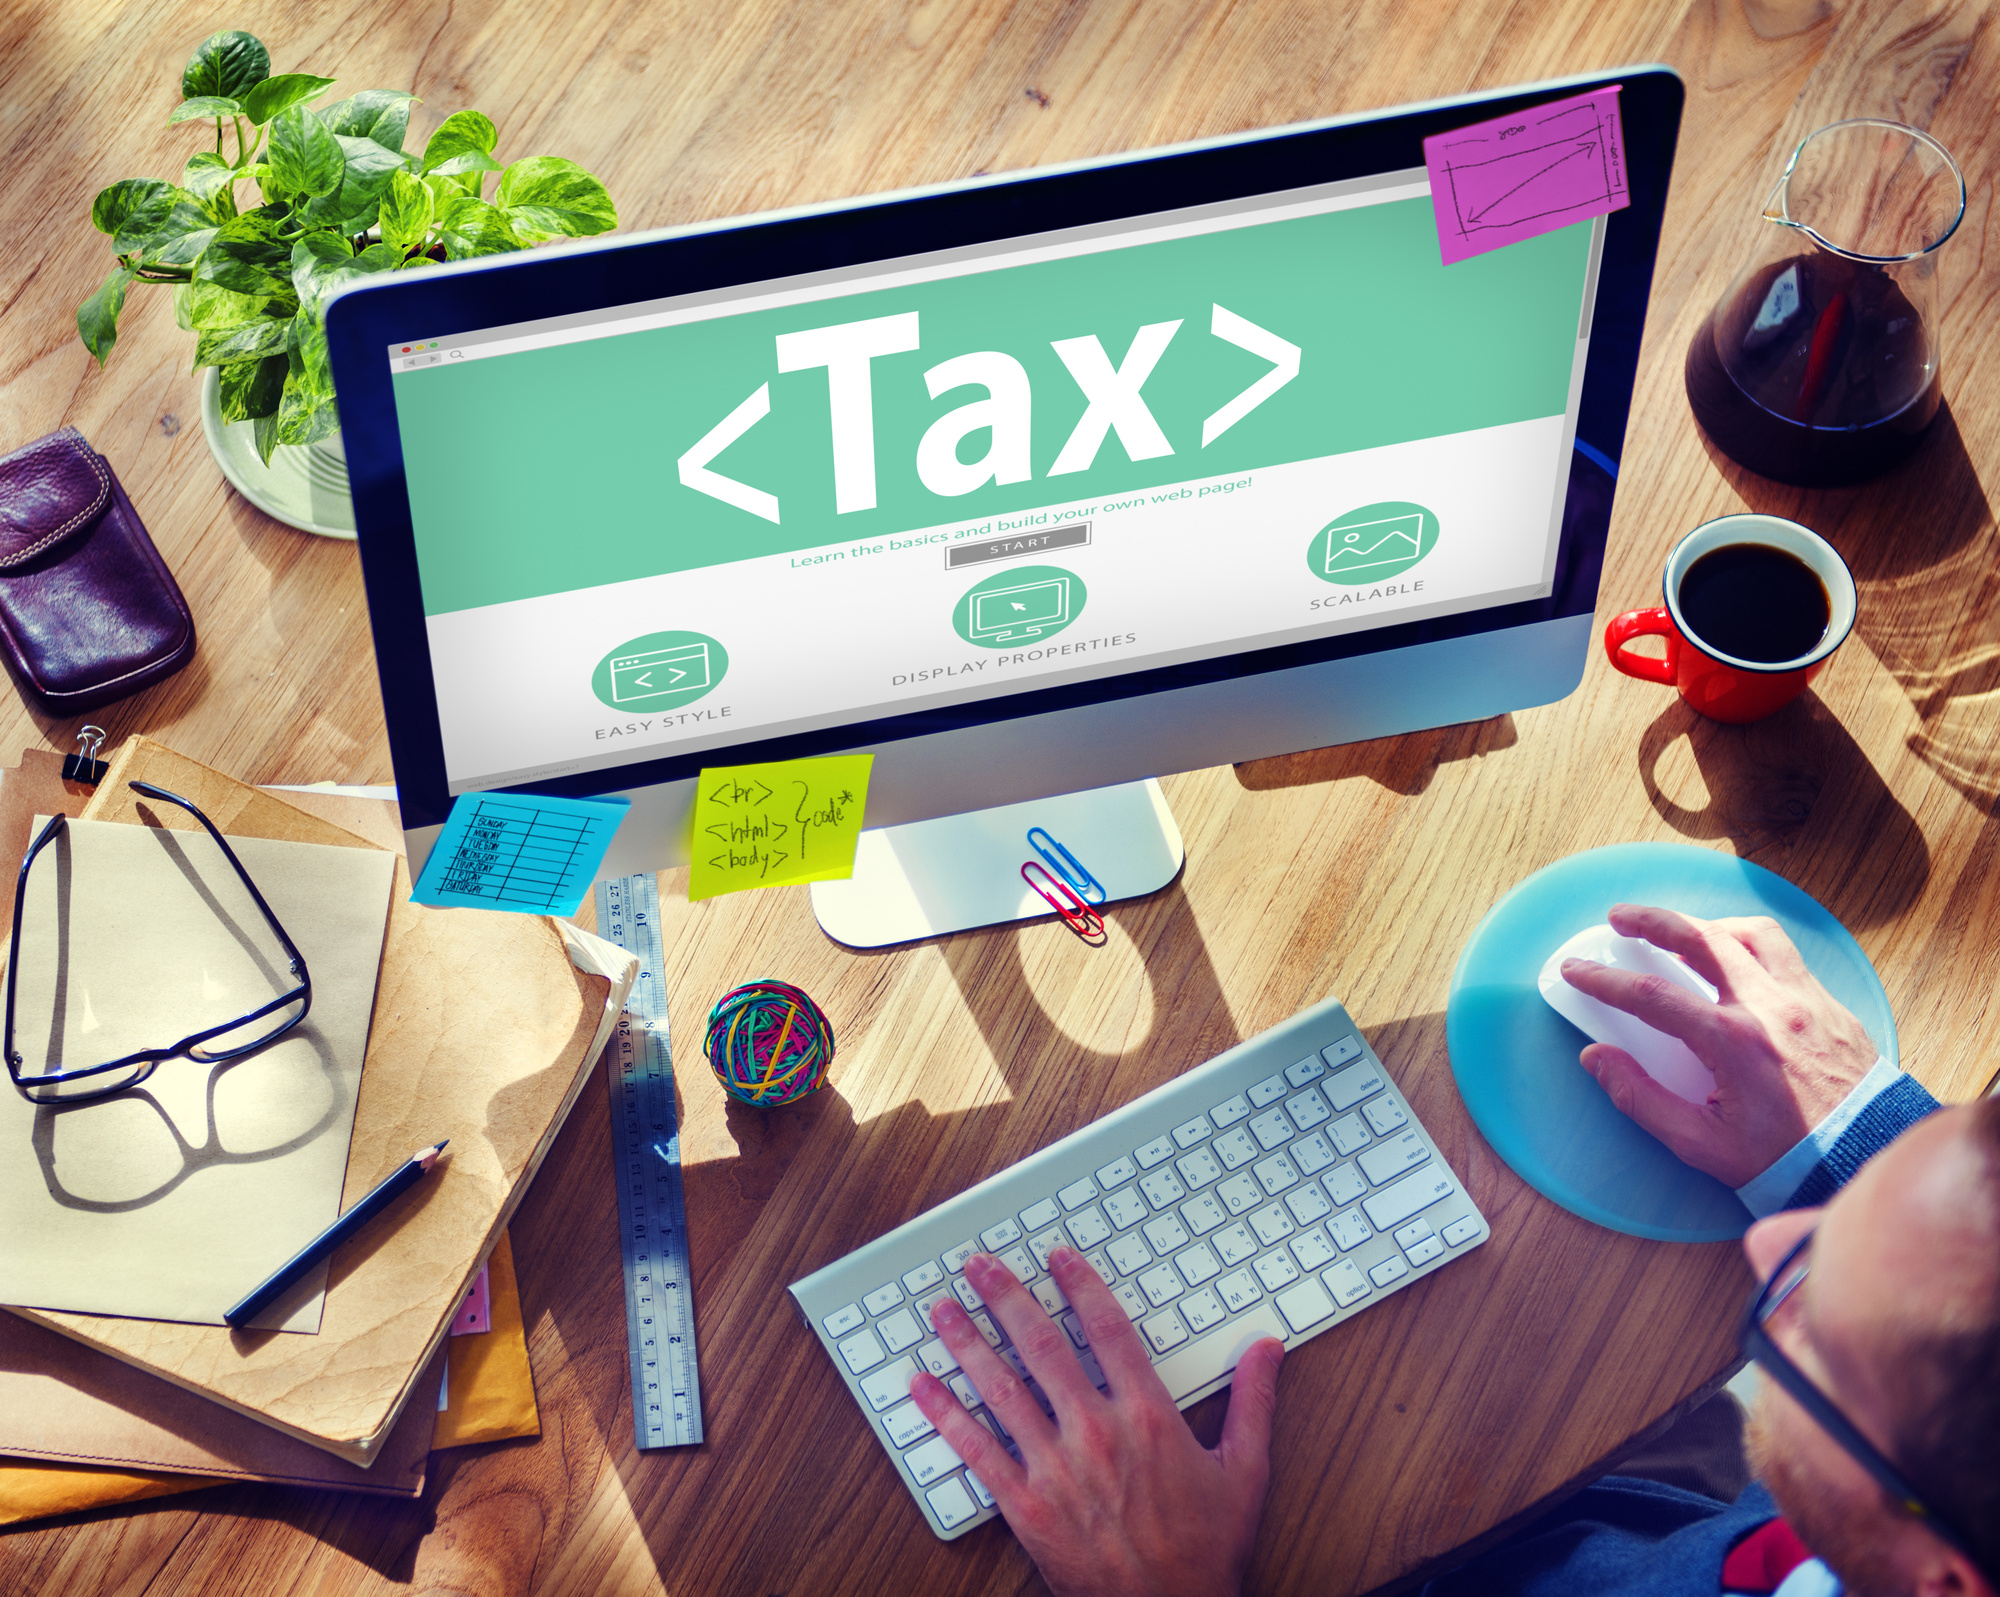 Are you wondering how to properly plan for your business taxes? Read here for the most important do's and don'ts of business tax planning.